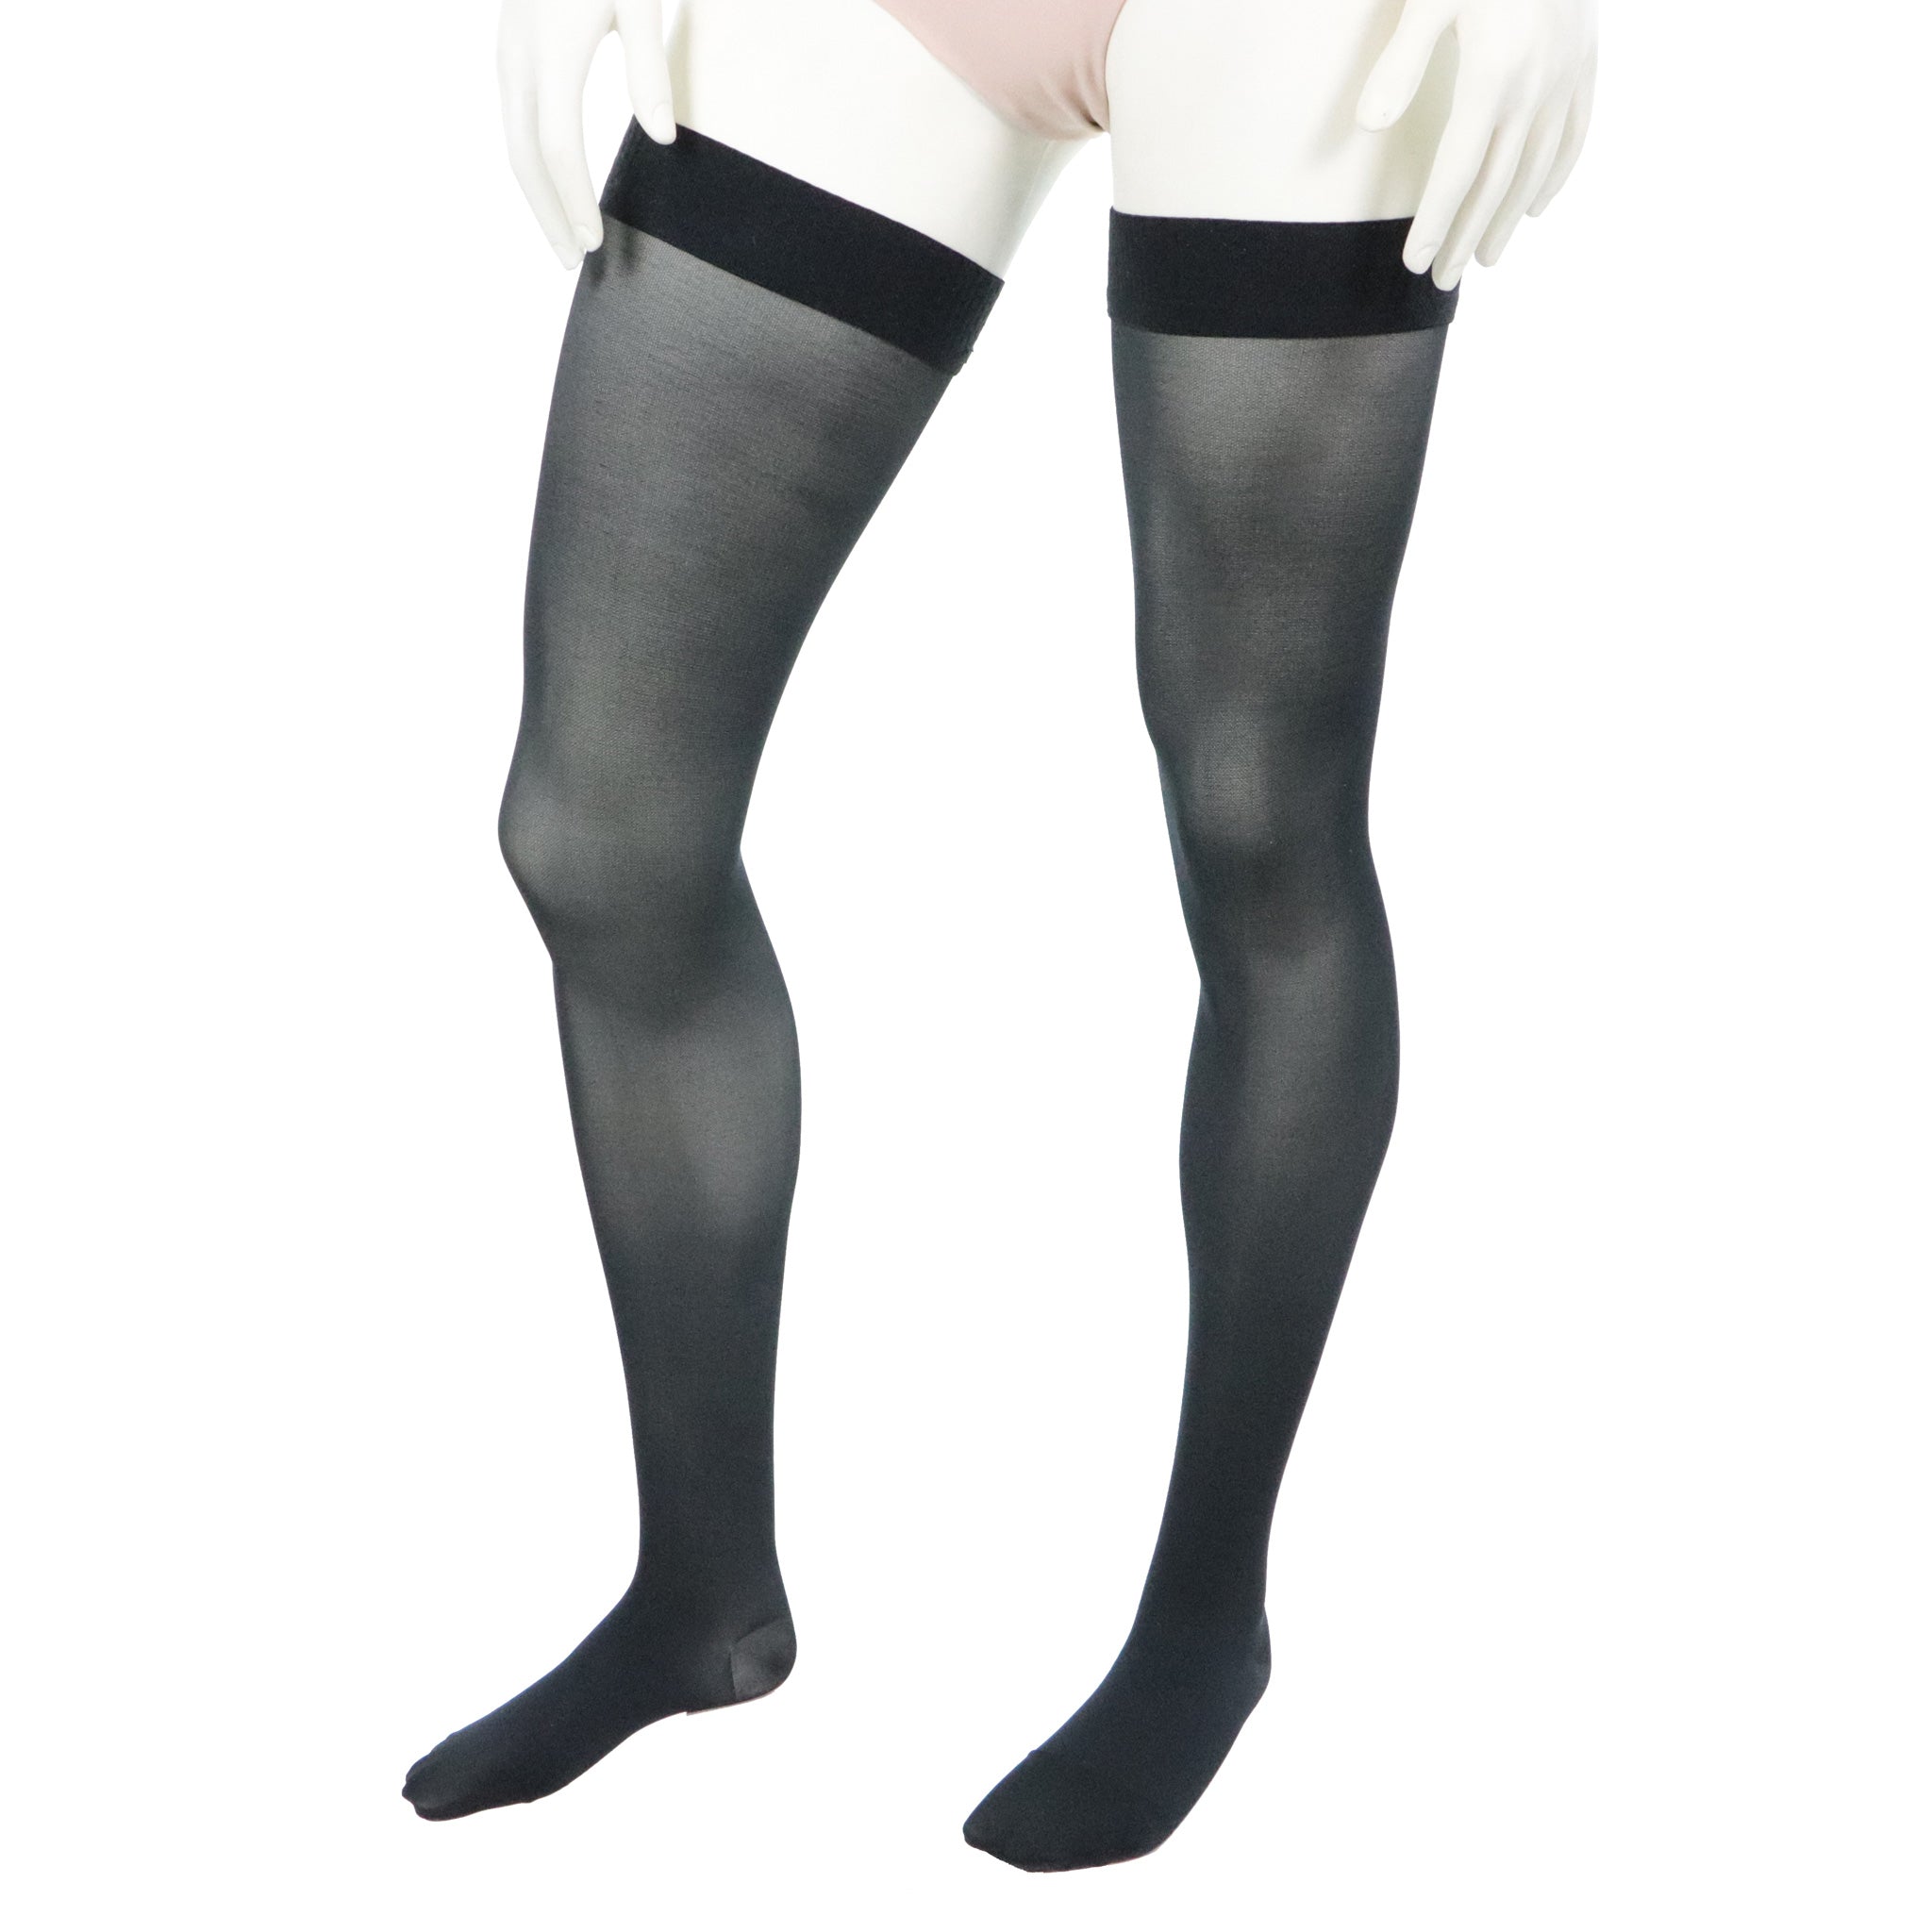 Doctor Brace Circutrend thigh high compression stockings 20-30 mmhg black front left view